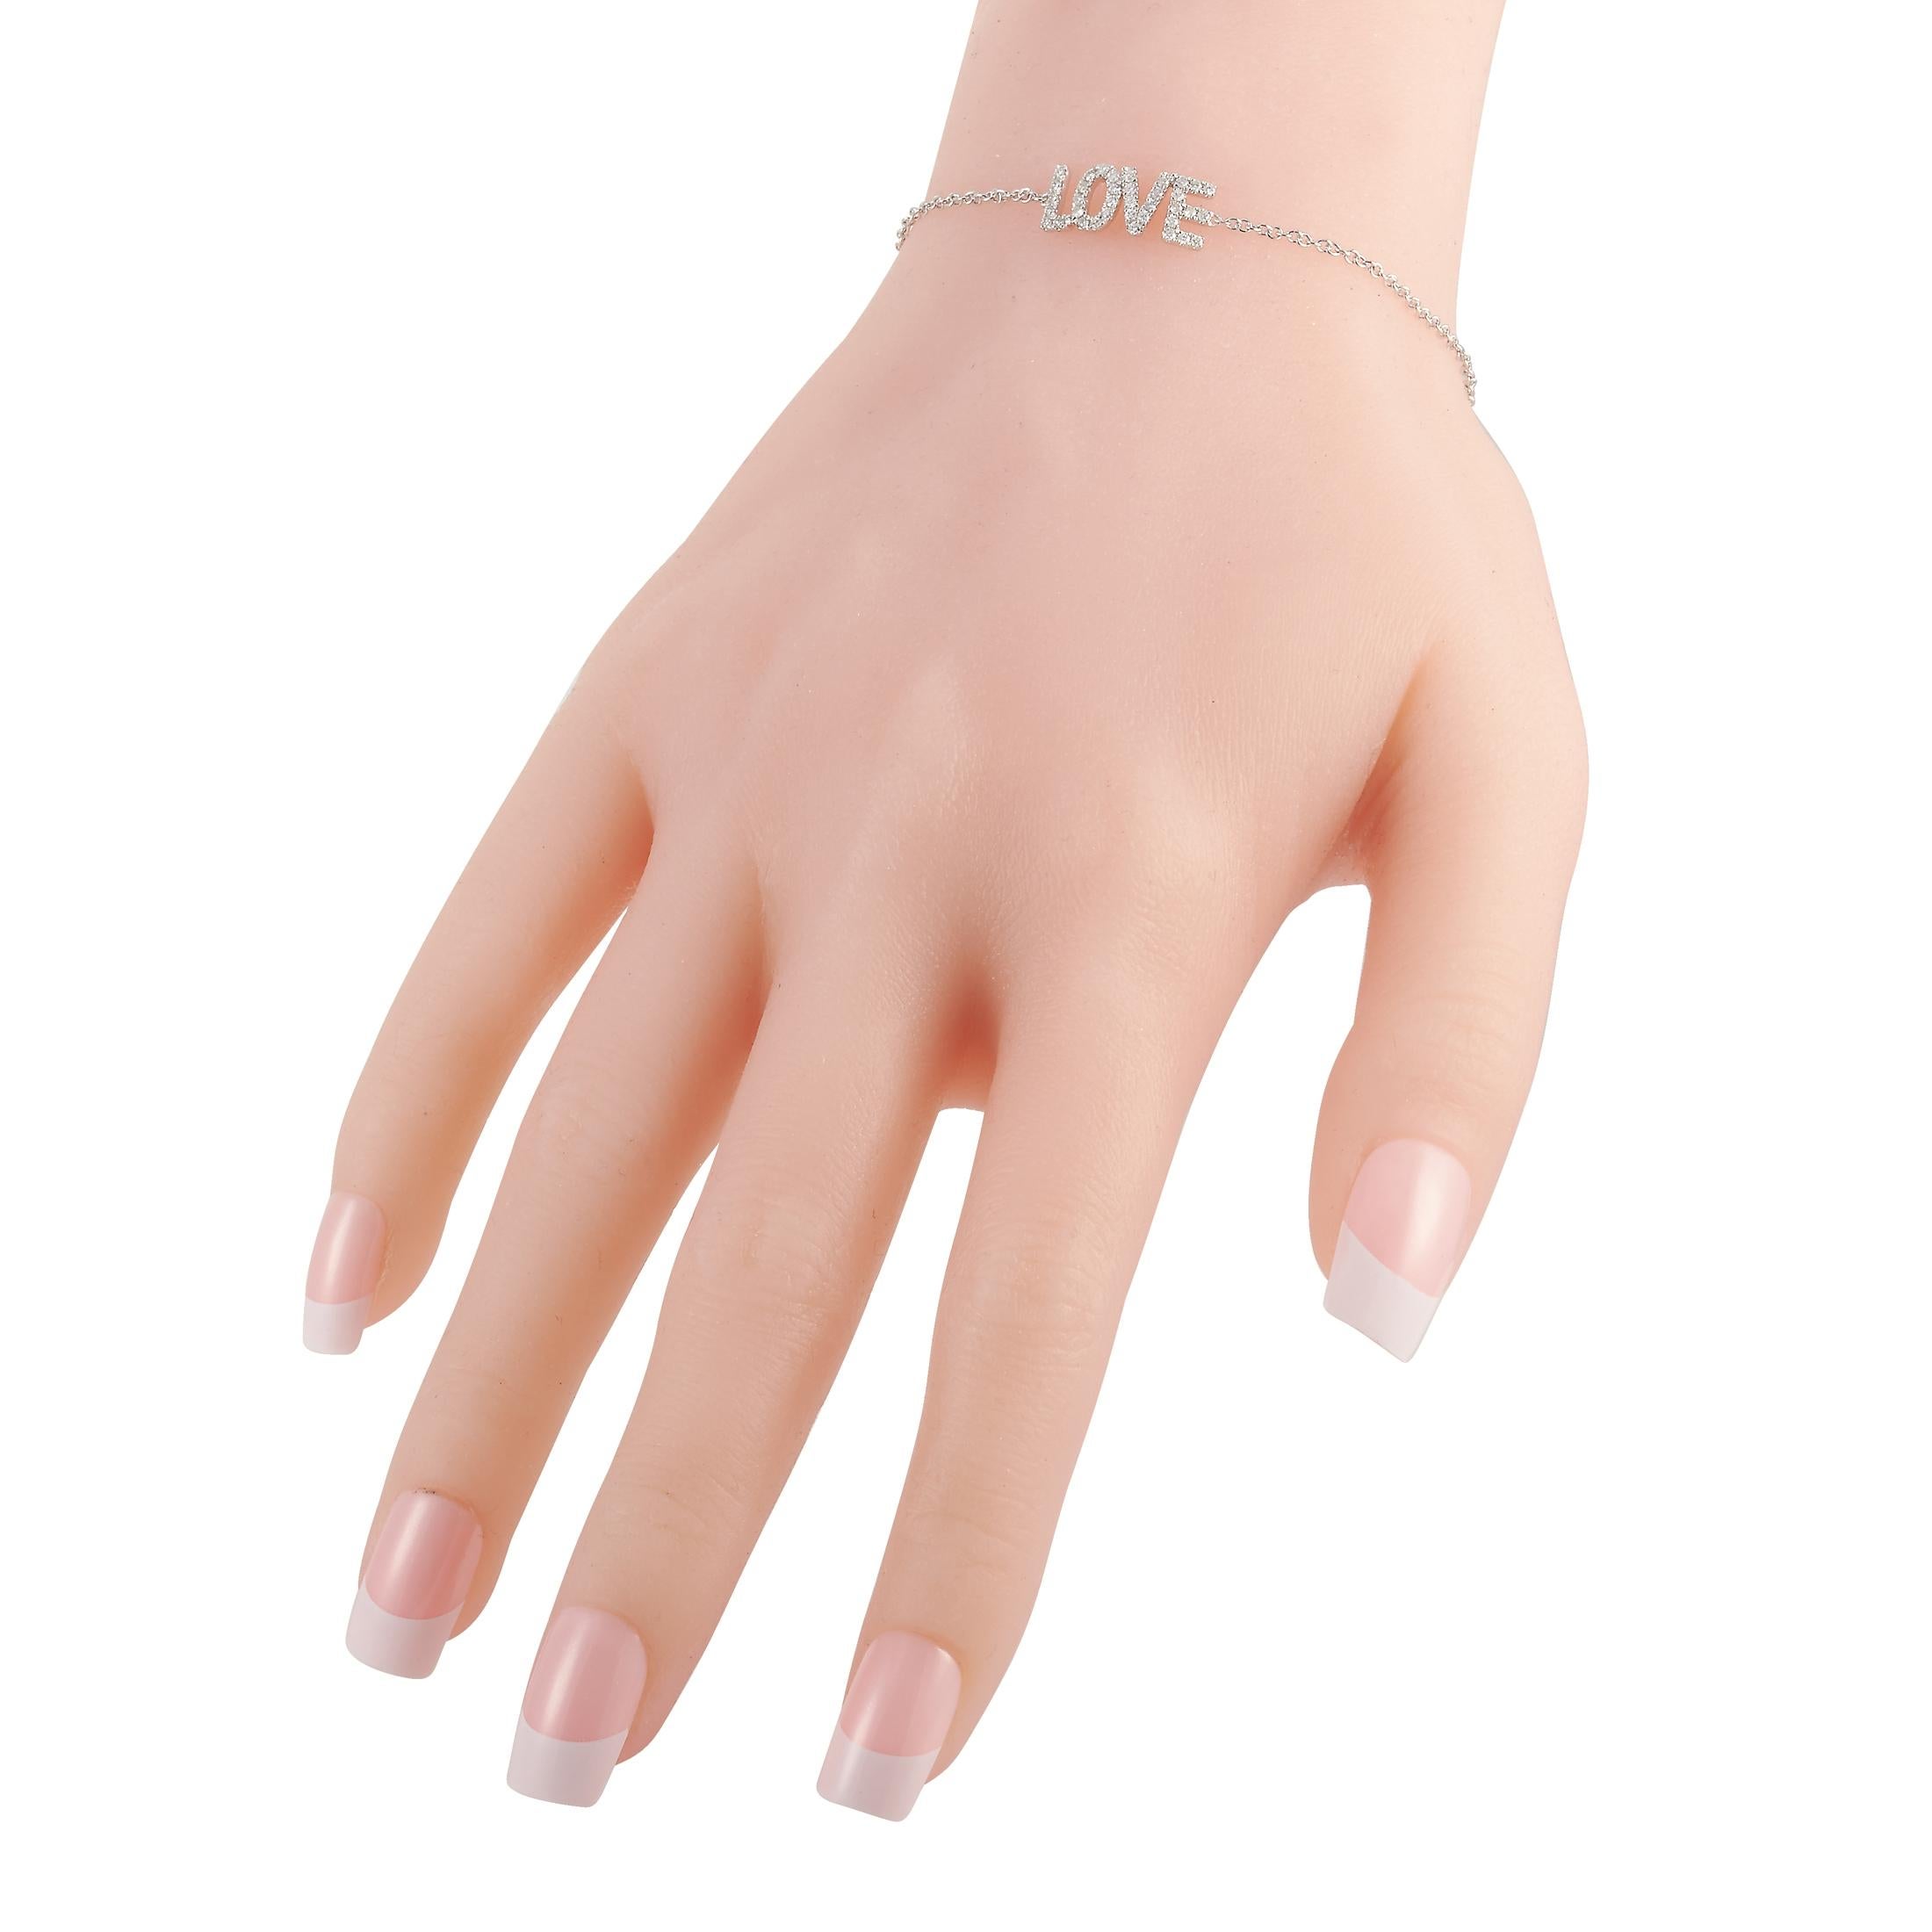 This LB Exclusive love bracelet is crafted from 14K white gold and weighs 2 grams, measuring 6.50” in length. The bracelet is set with diamonds that total 0.30 carats.
 
 Offered in brand new condition, this item includes a gift box.